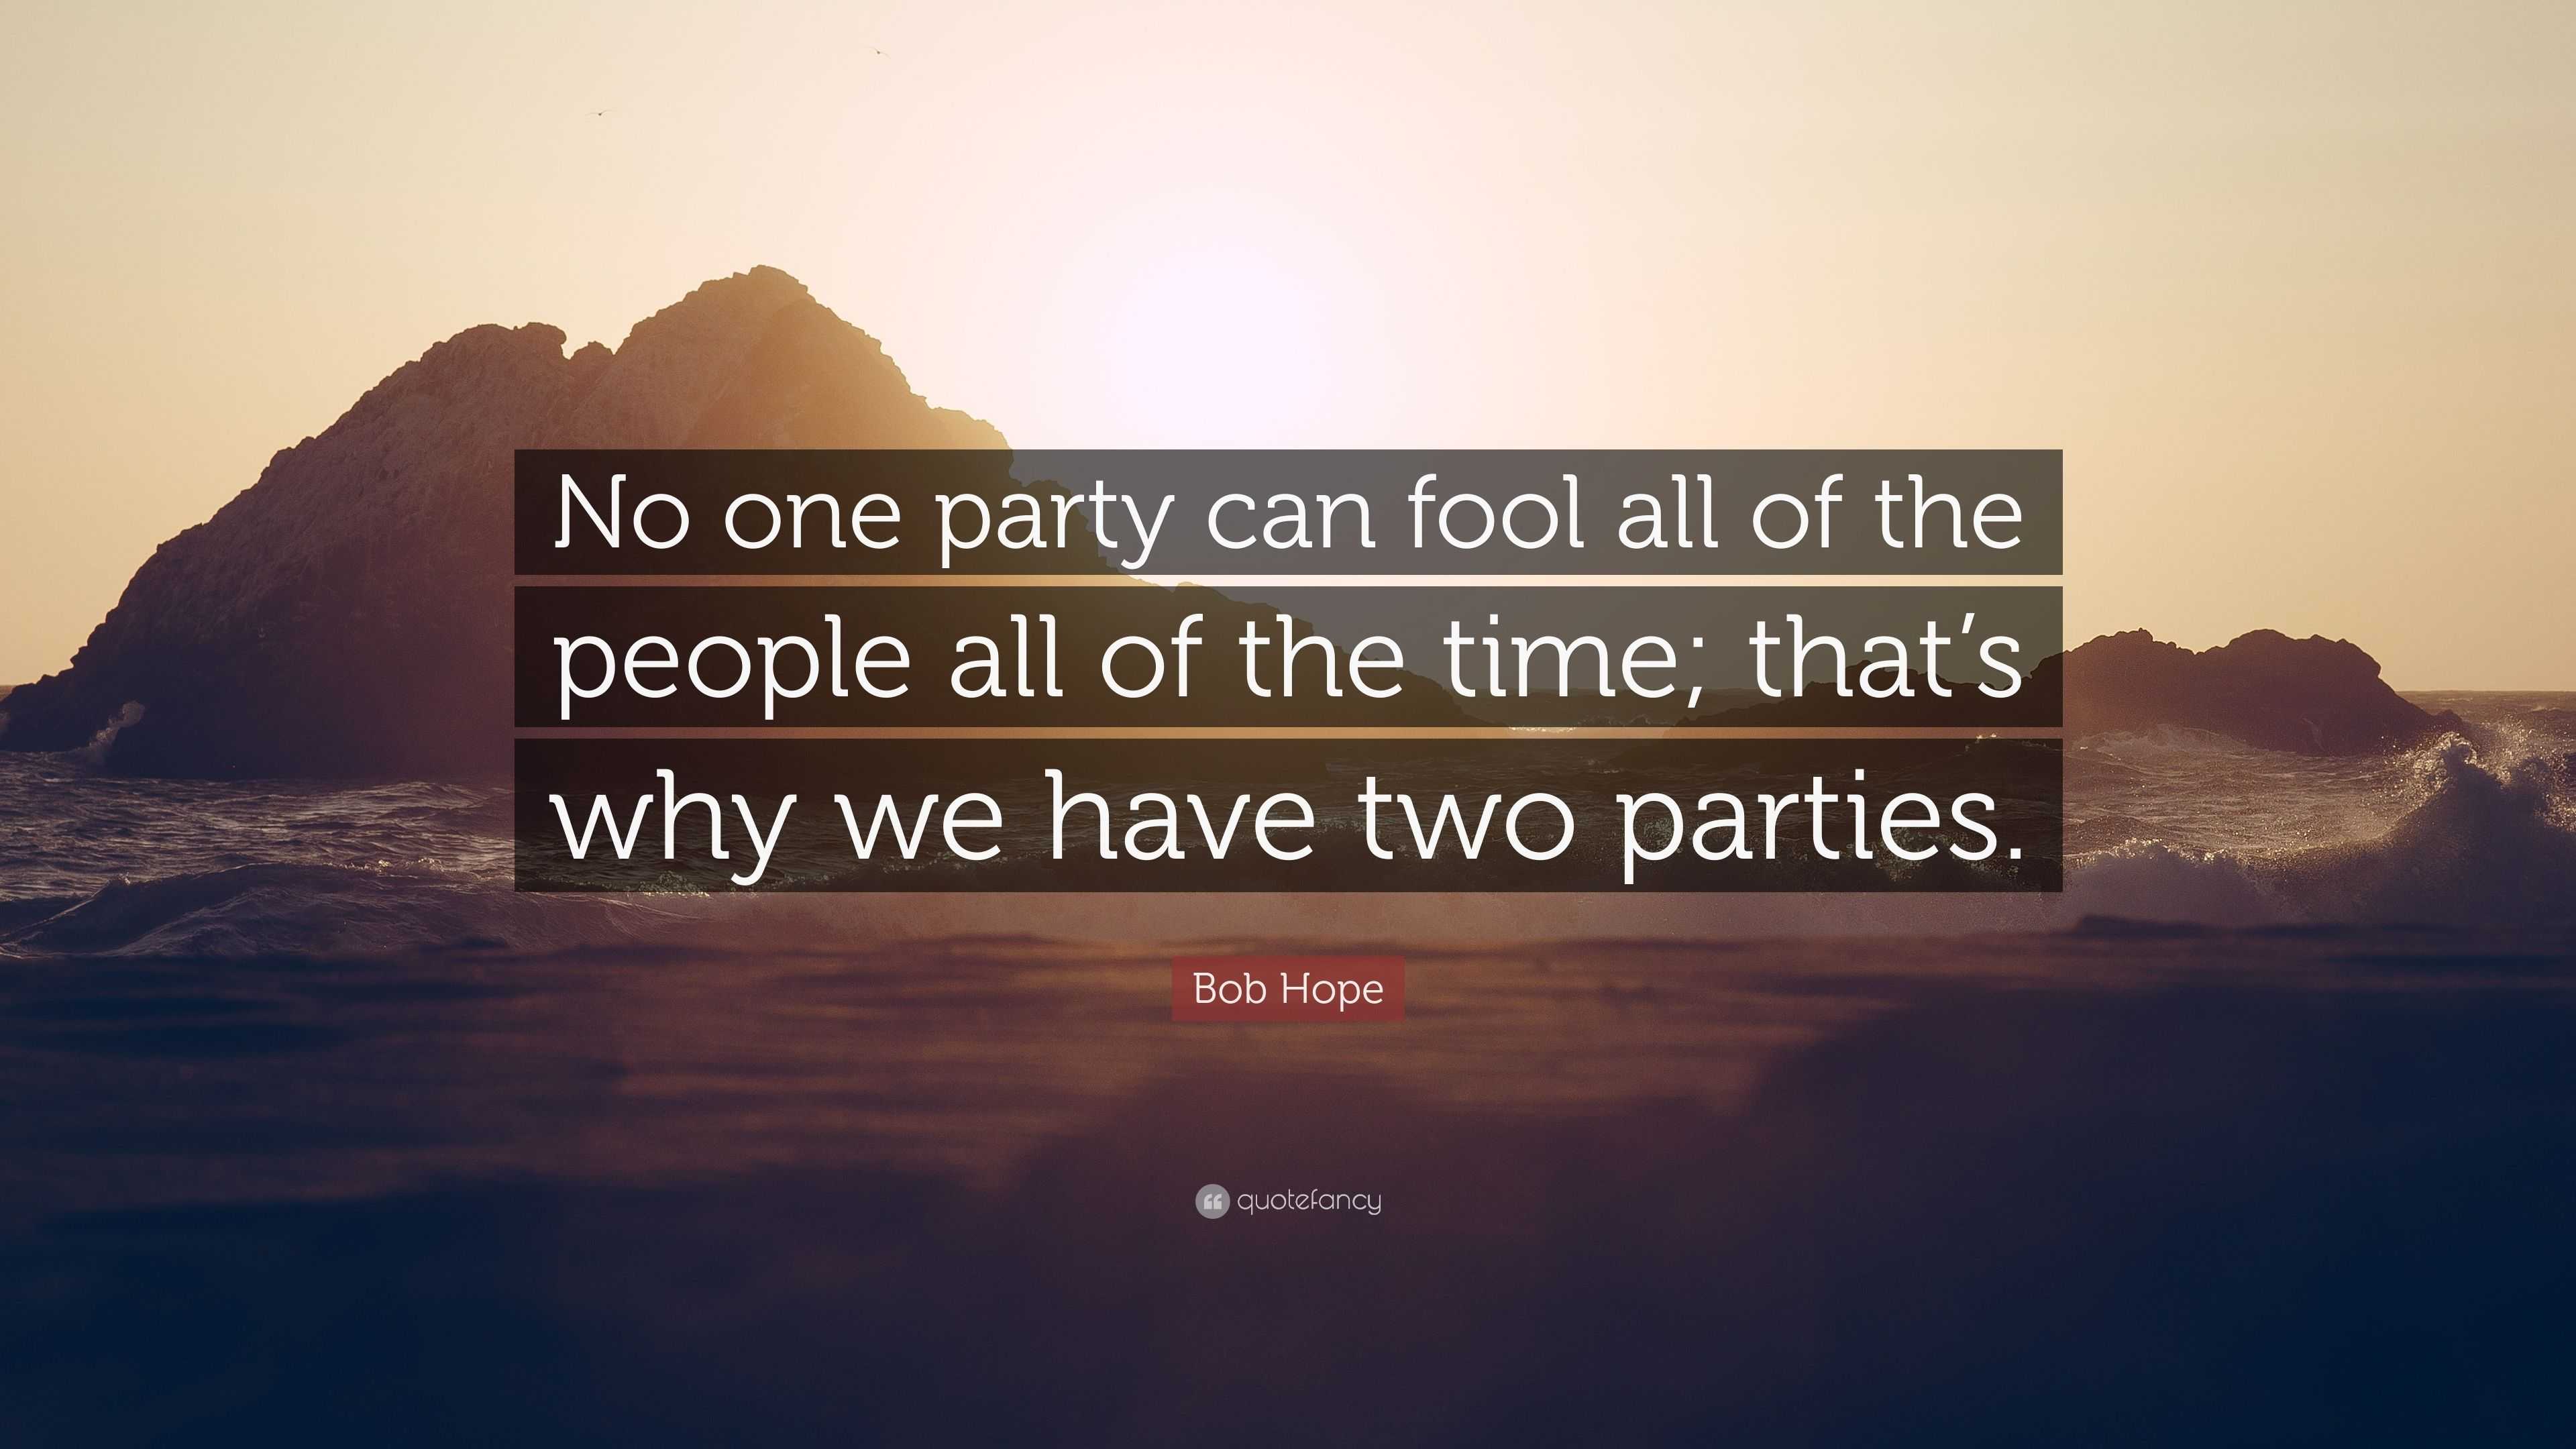 Bob Hope Quote: “No one party can fool all of the people all of the ...